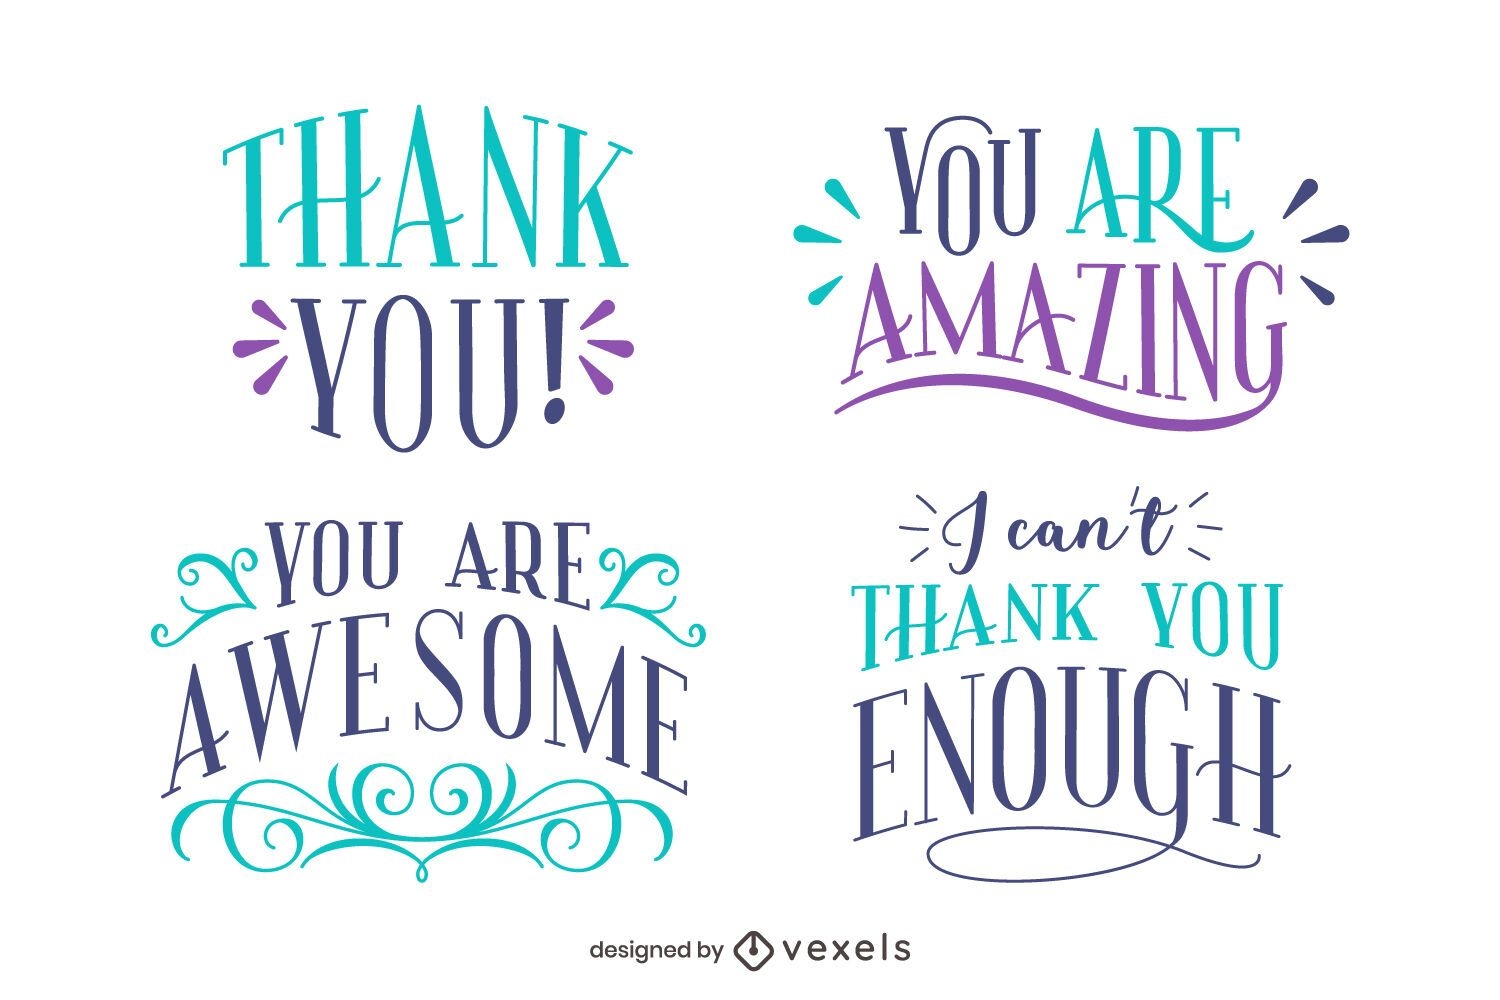 Thank you letterings set